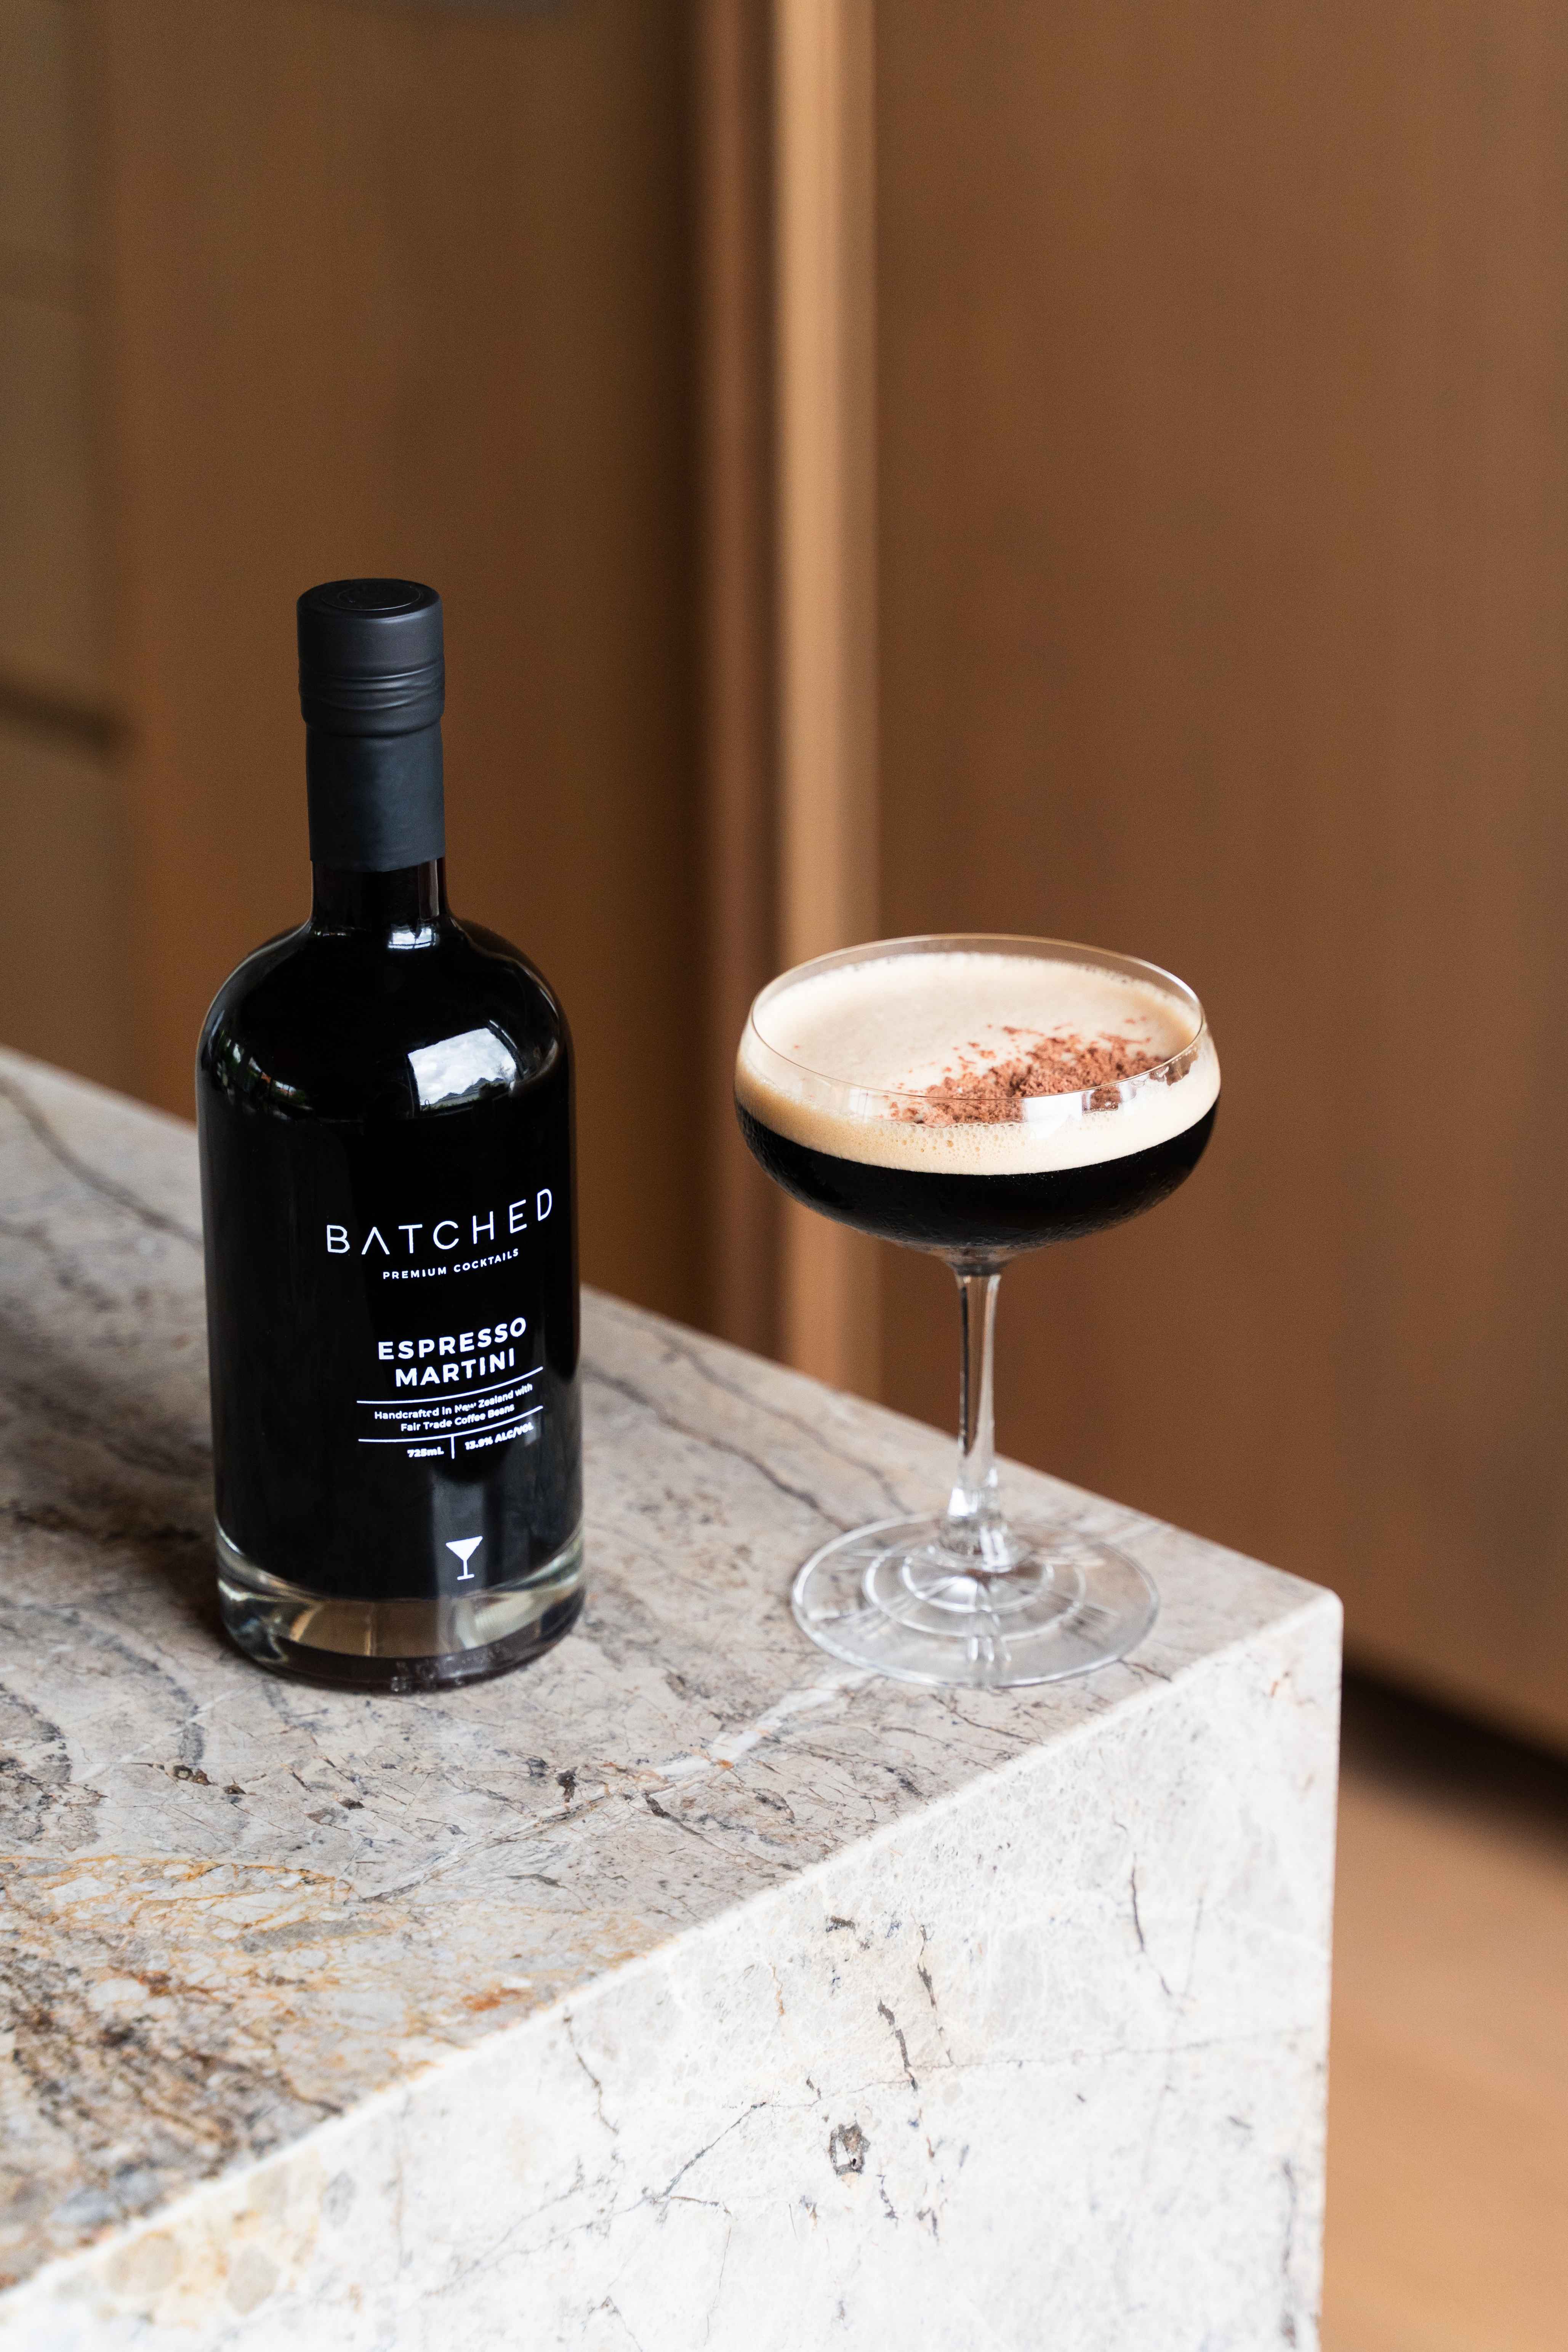 Batched Espresso Martini bottle and glass on bench top